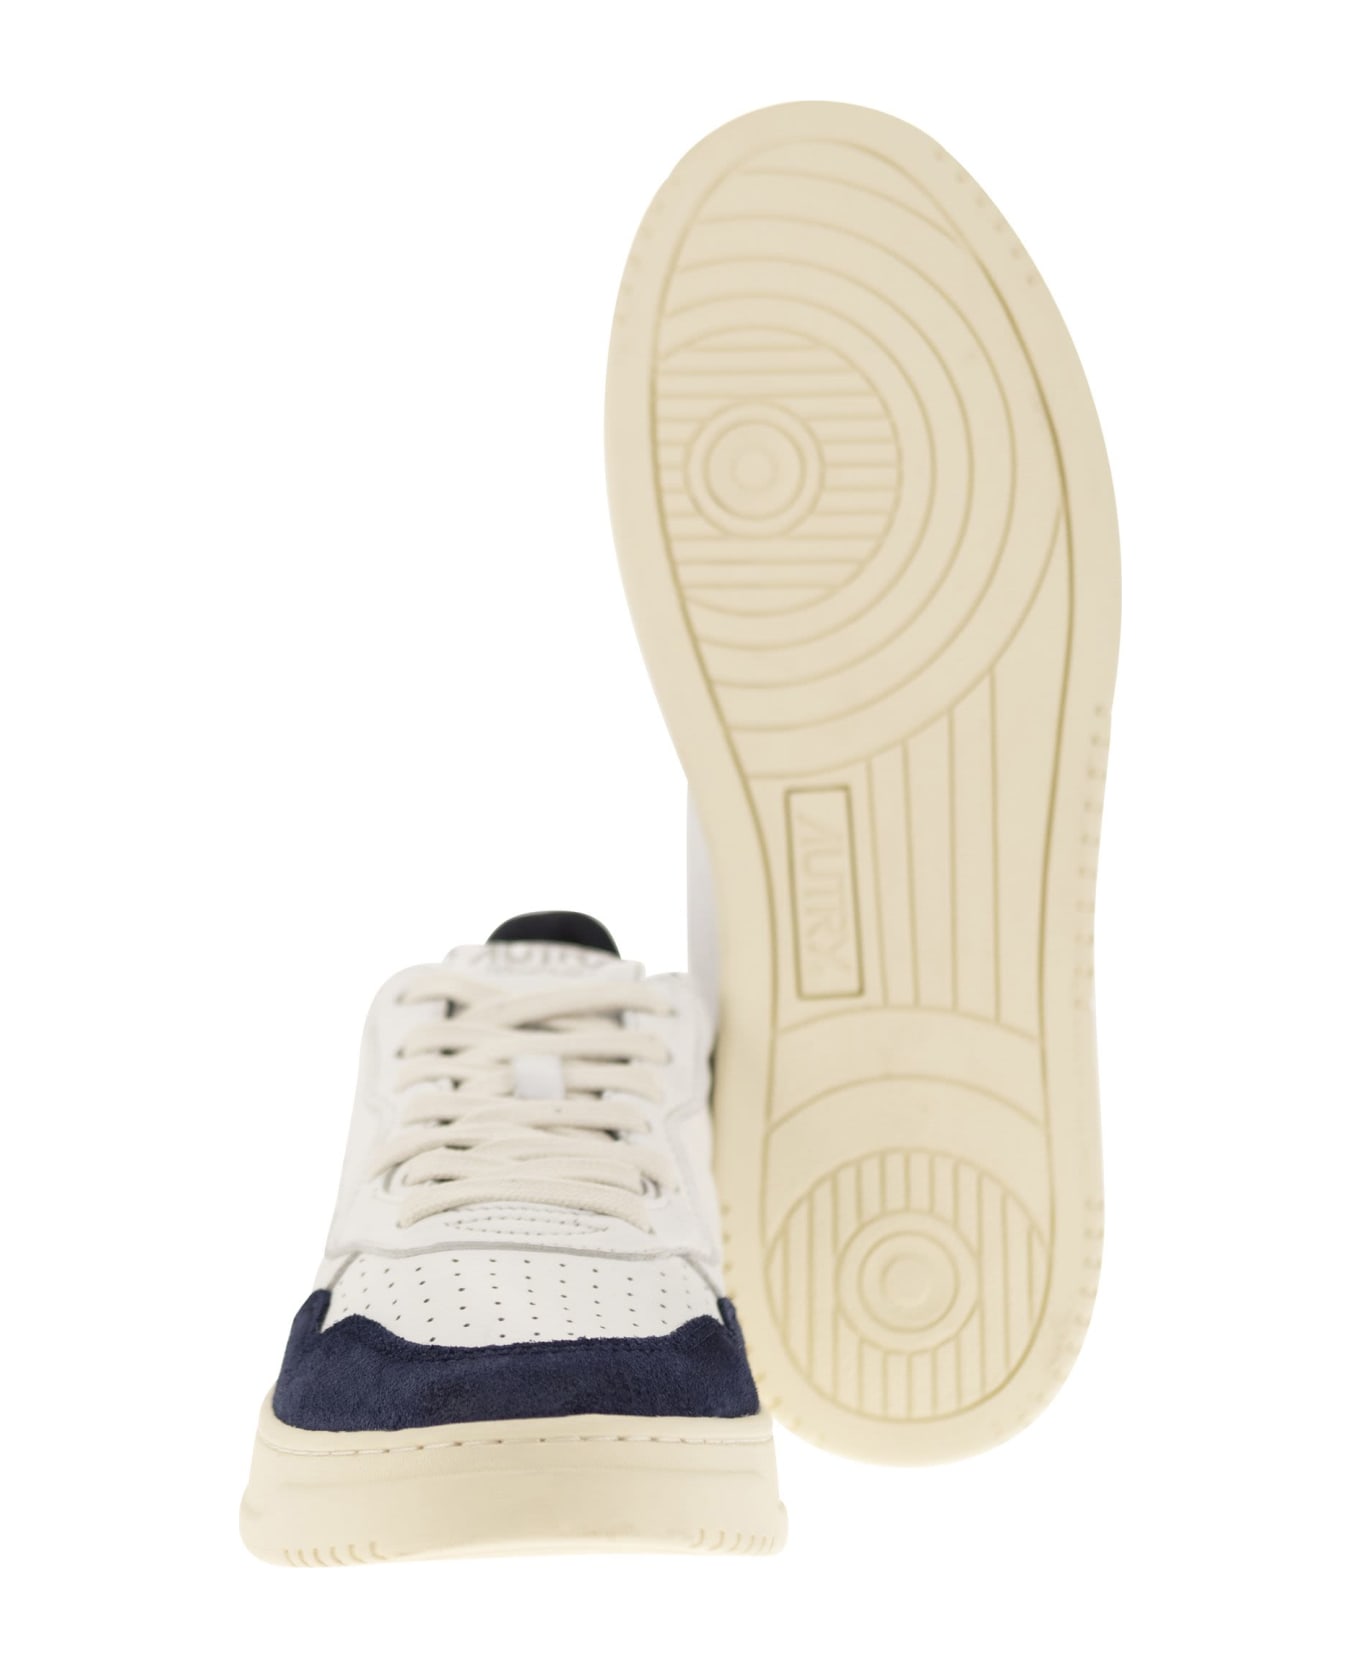 Autry Medalist Low Sneakers - White/blue スニーカー